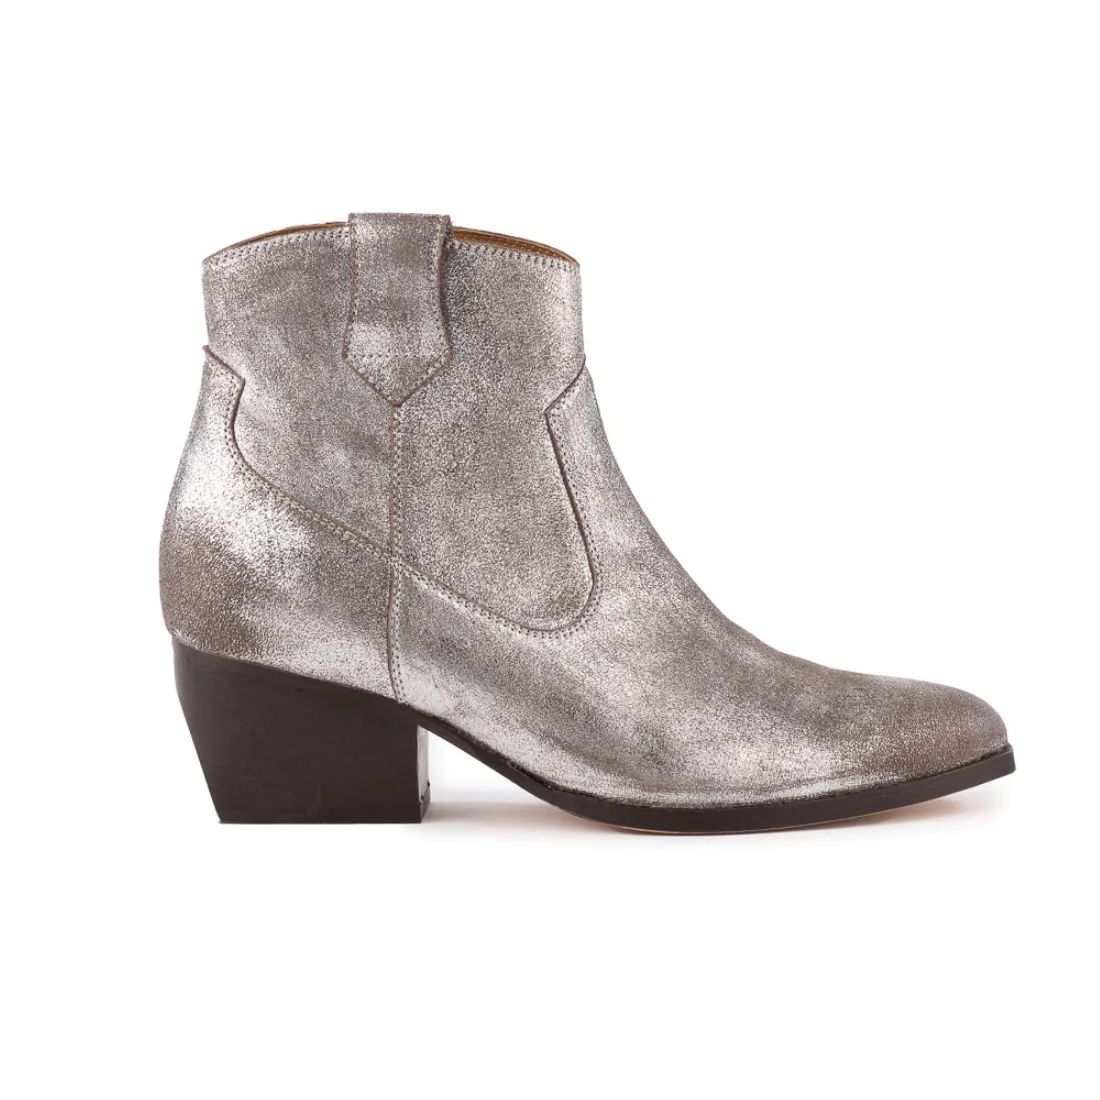 seychelles upside boot in pewter suede